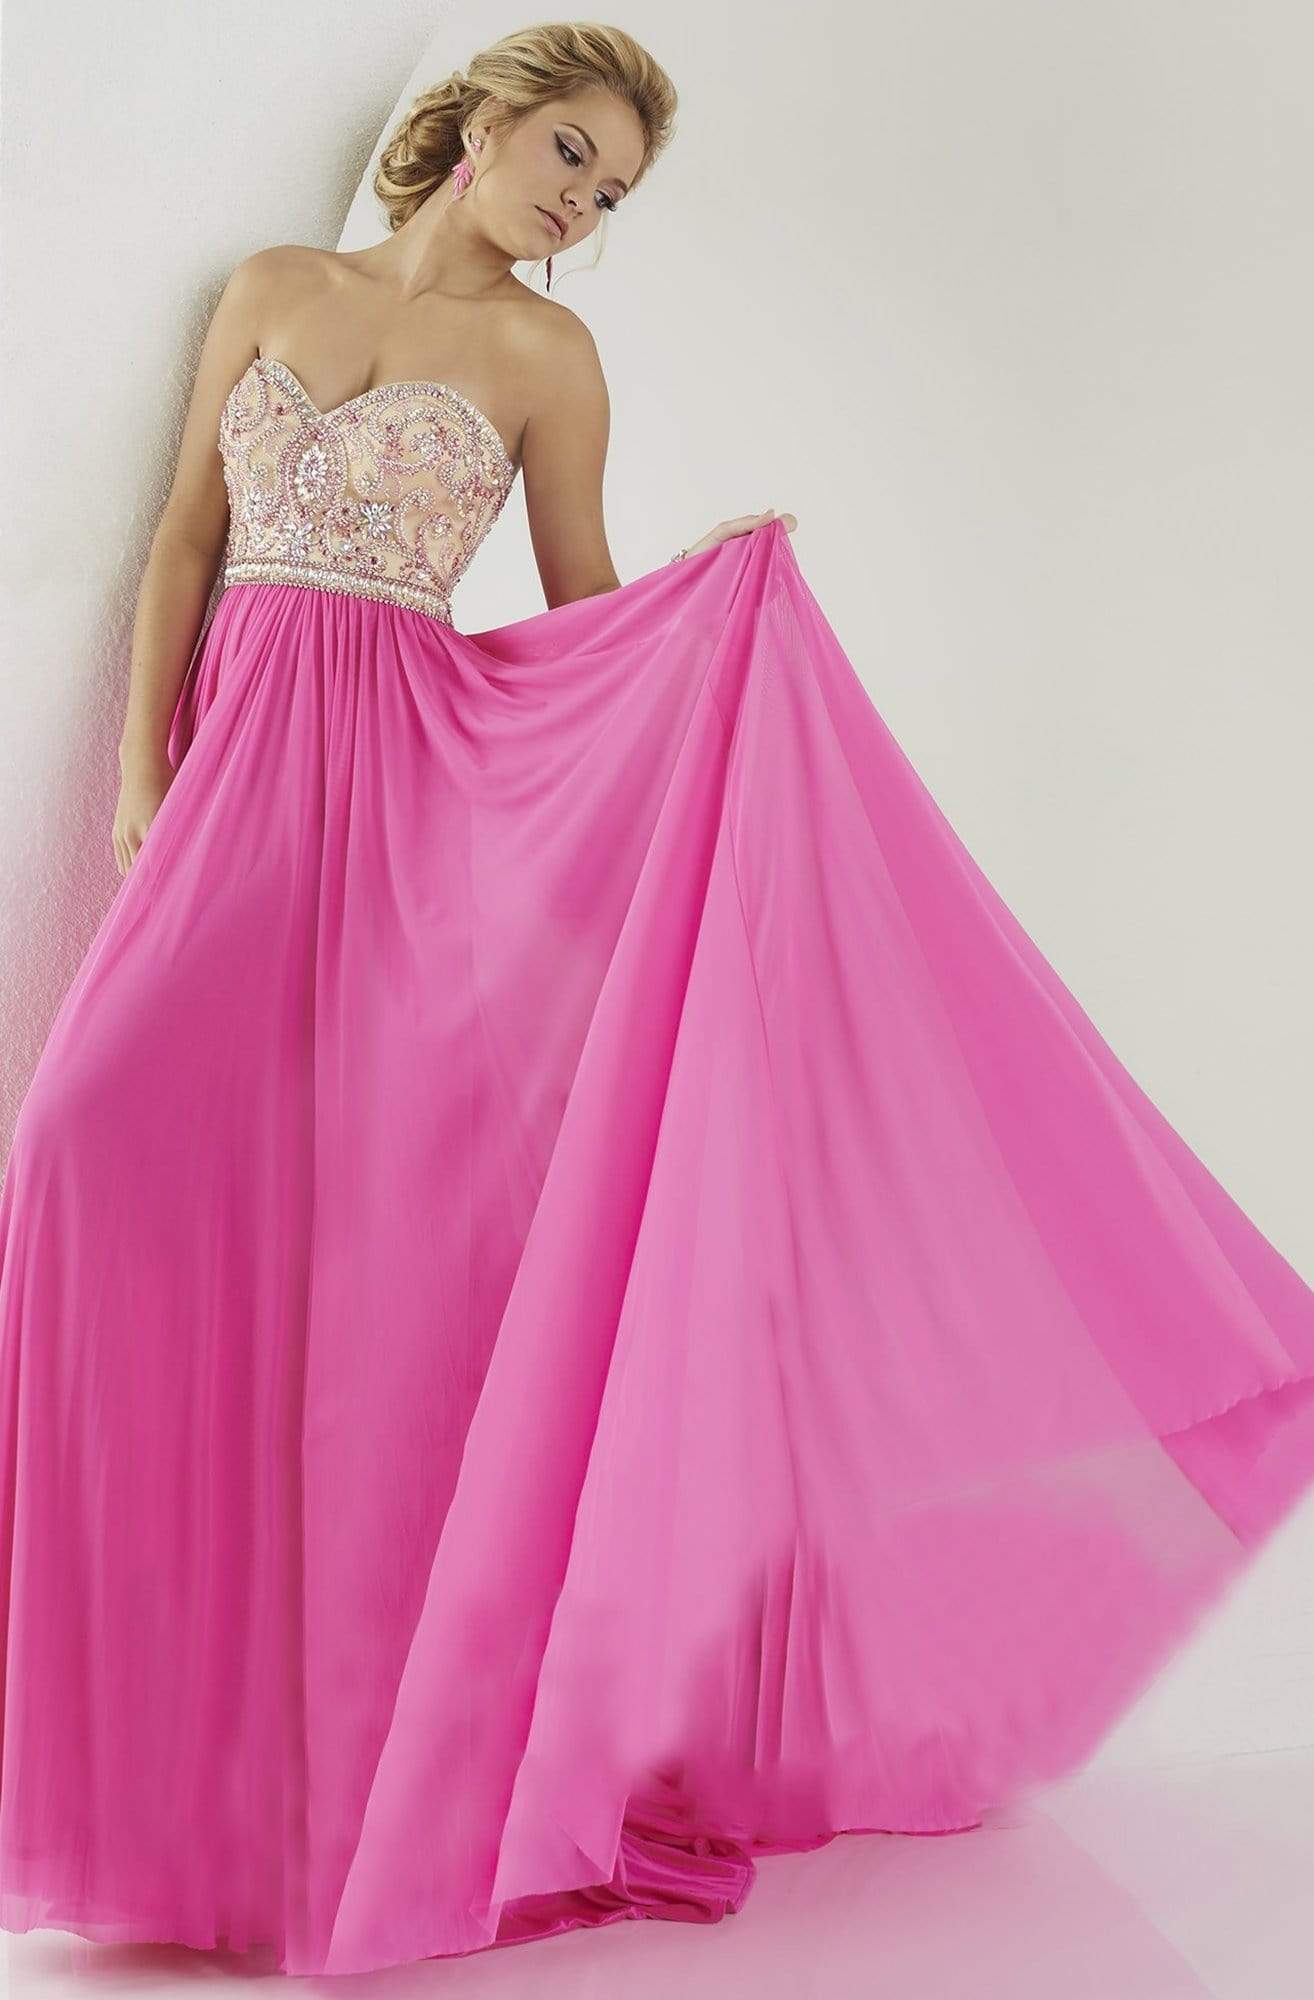 Tiffany Designs - 16187 Intricately Detailed Sweetheart A-Line Evening Gown Special Occasion Dress 0 / Cerise Pink